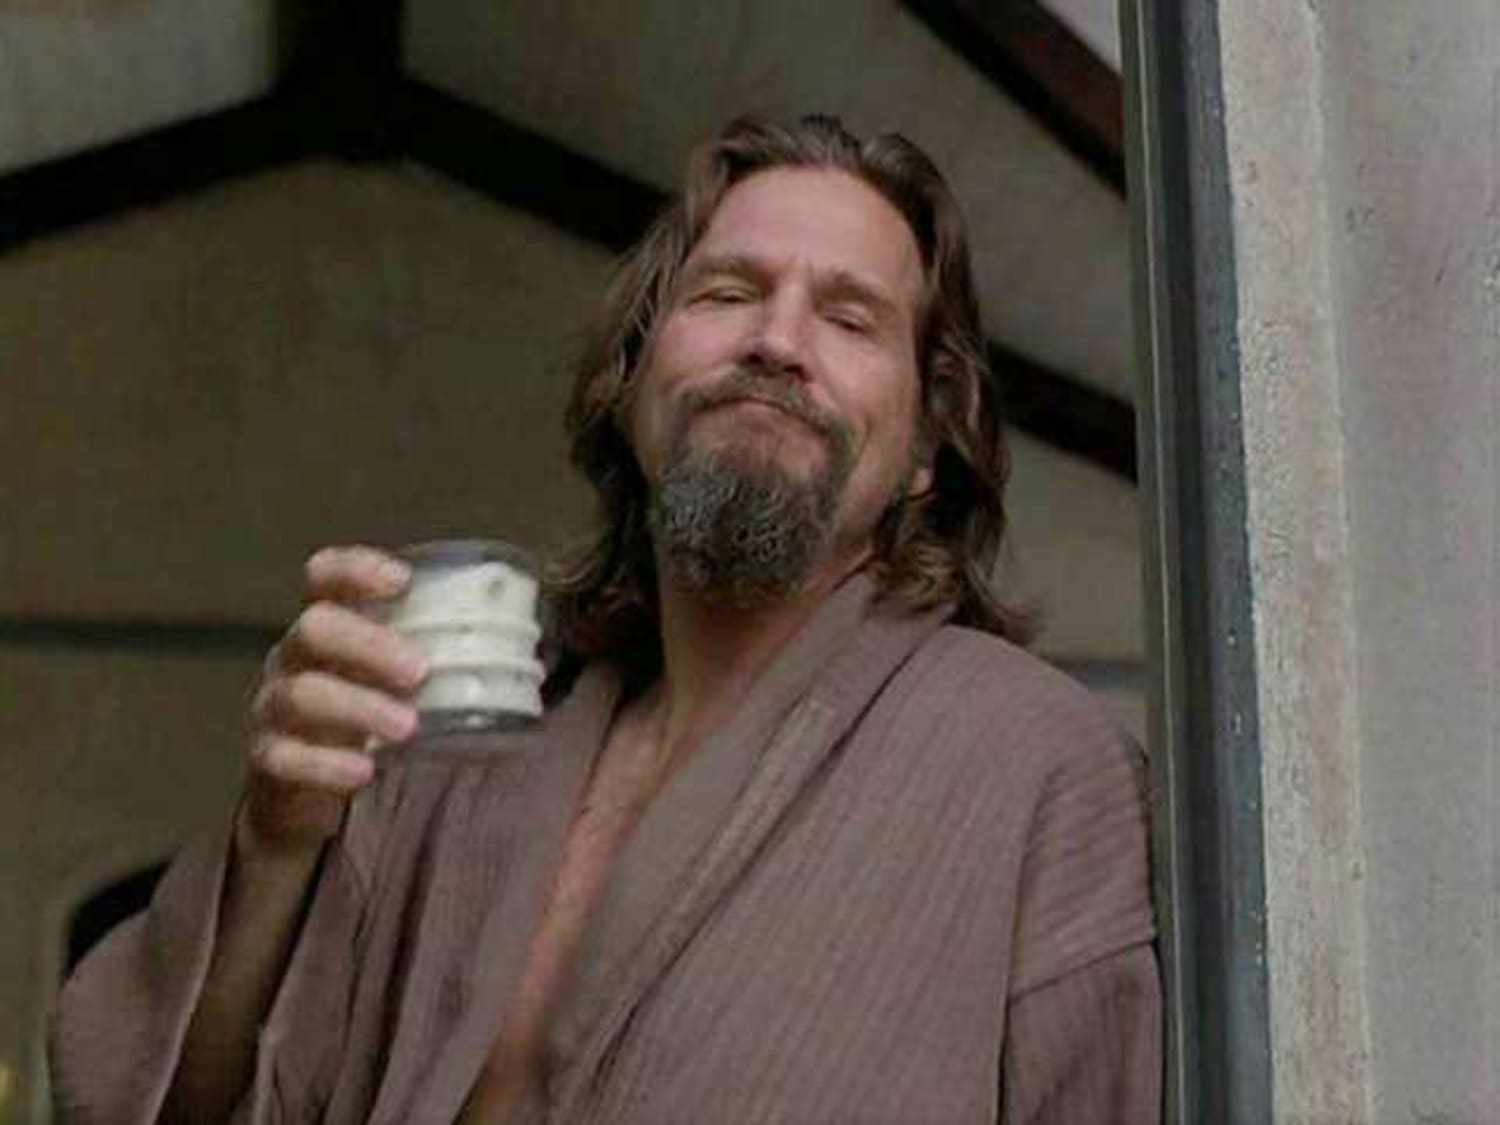 White Russians & The Big Lebowski (With An Easy Recipe!) | Kitchn